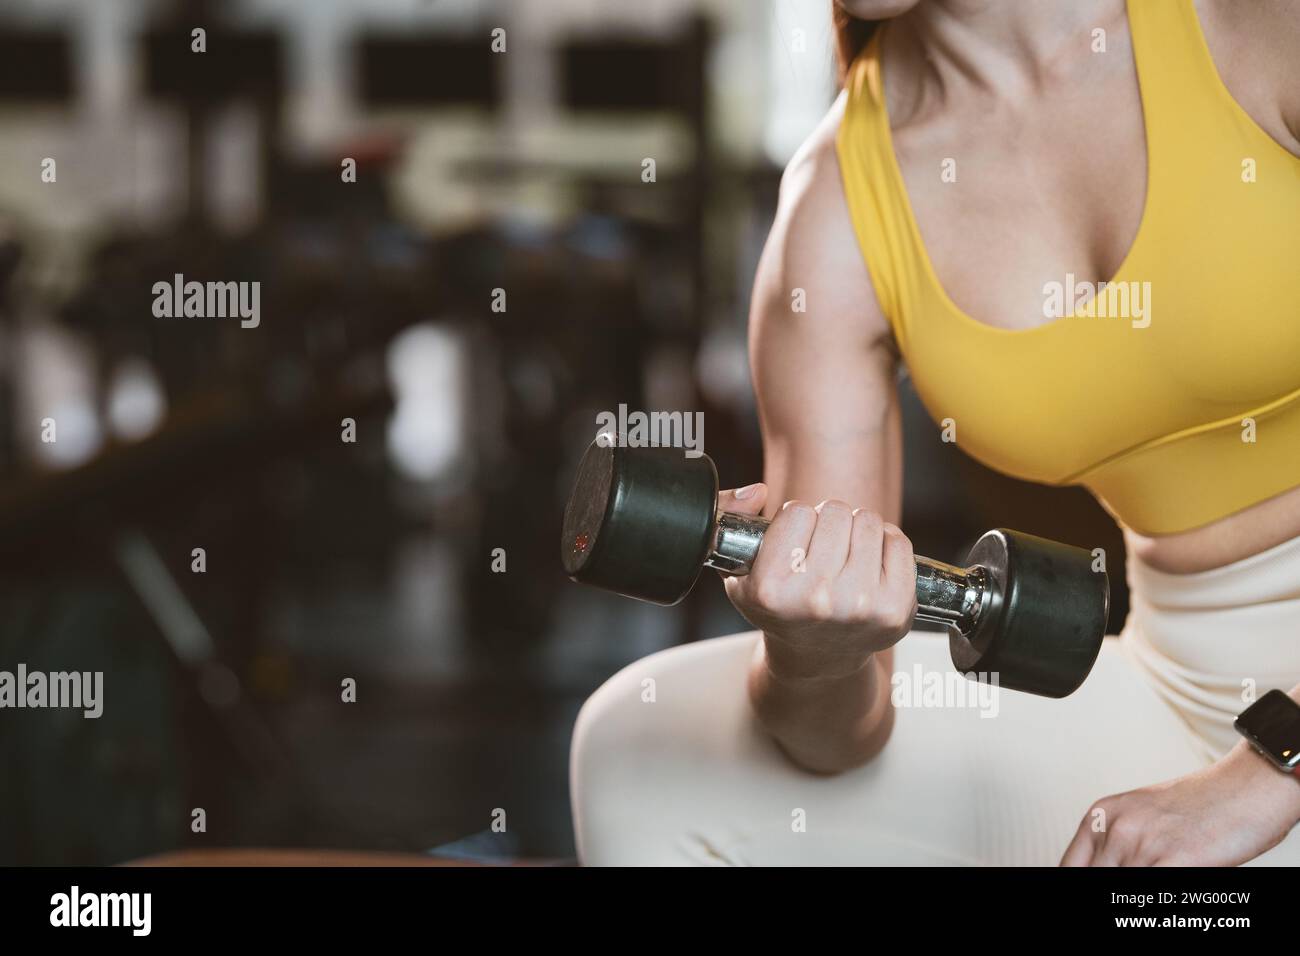 Fitness asian woman doing exercise and lifting dumbbells weights at sport gym. Stock Photo